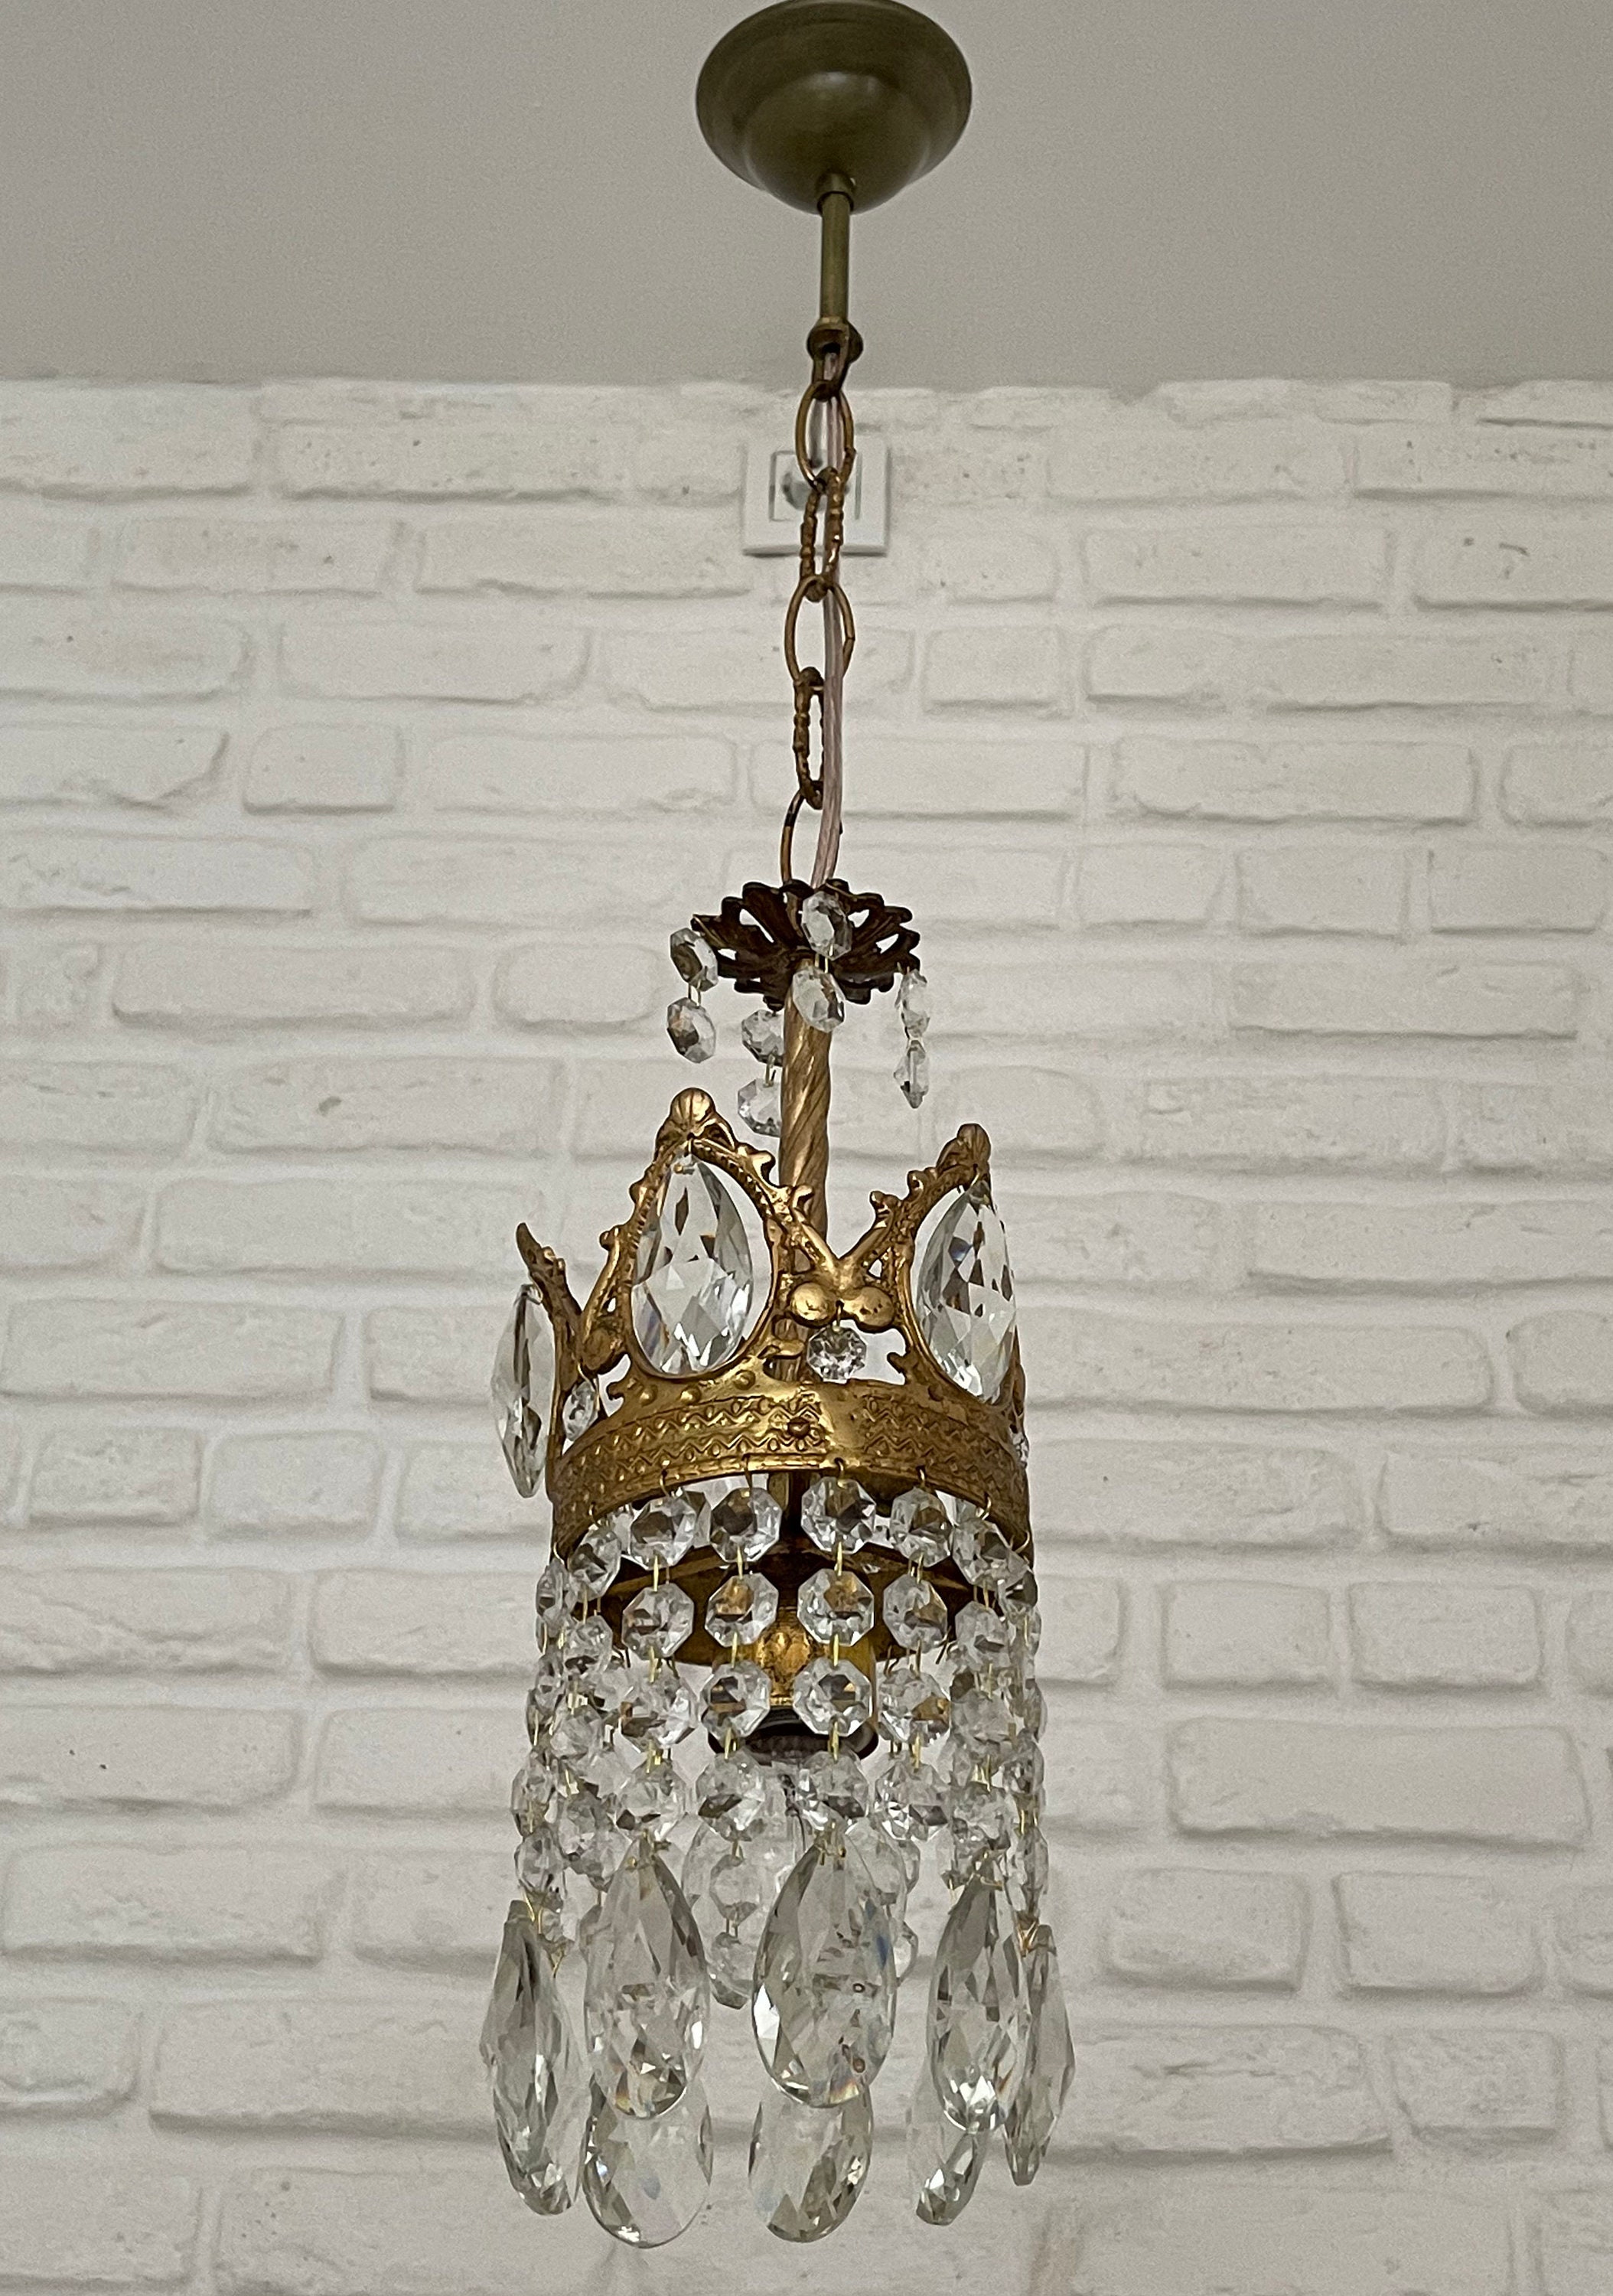 Antique Vintage Brass & Crystals Small Chandelier Ceiling Light Pendant  Lighting Glass Lamp From 1950's 